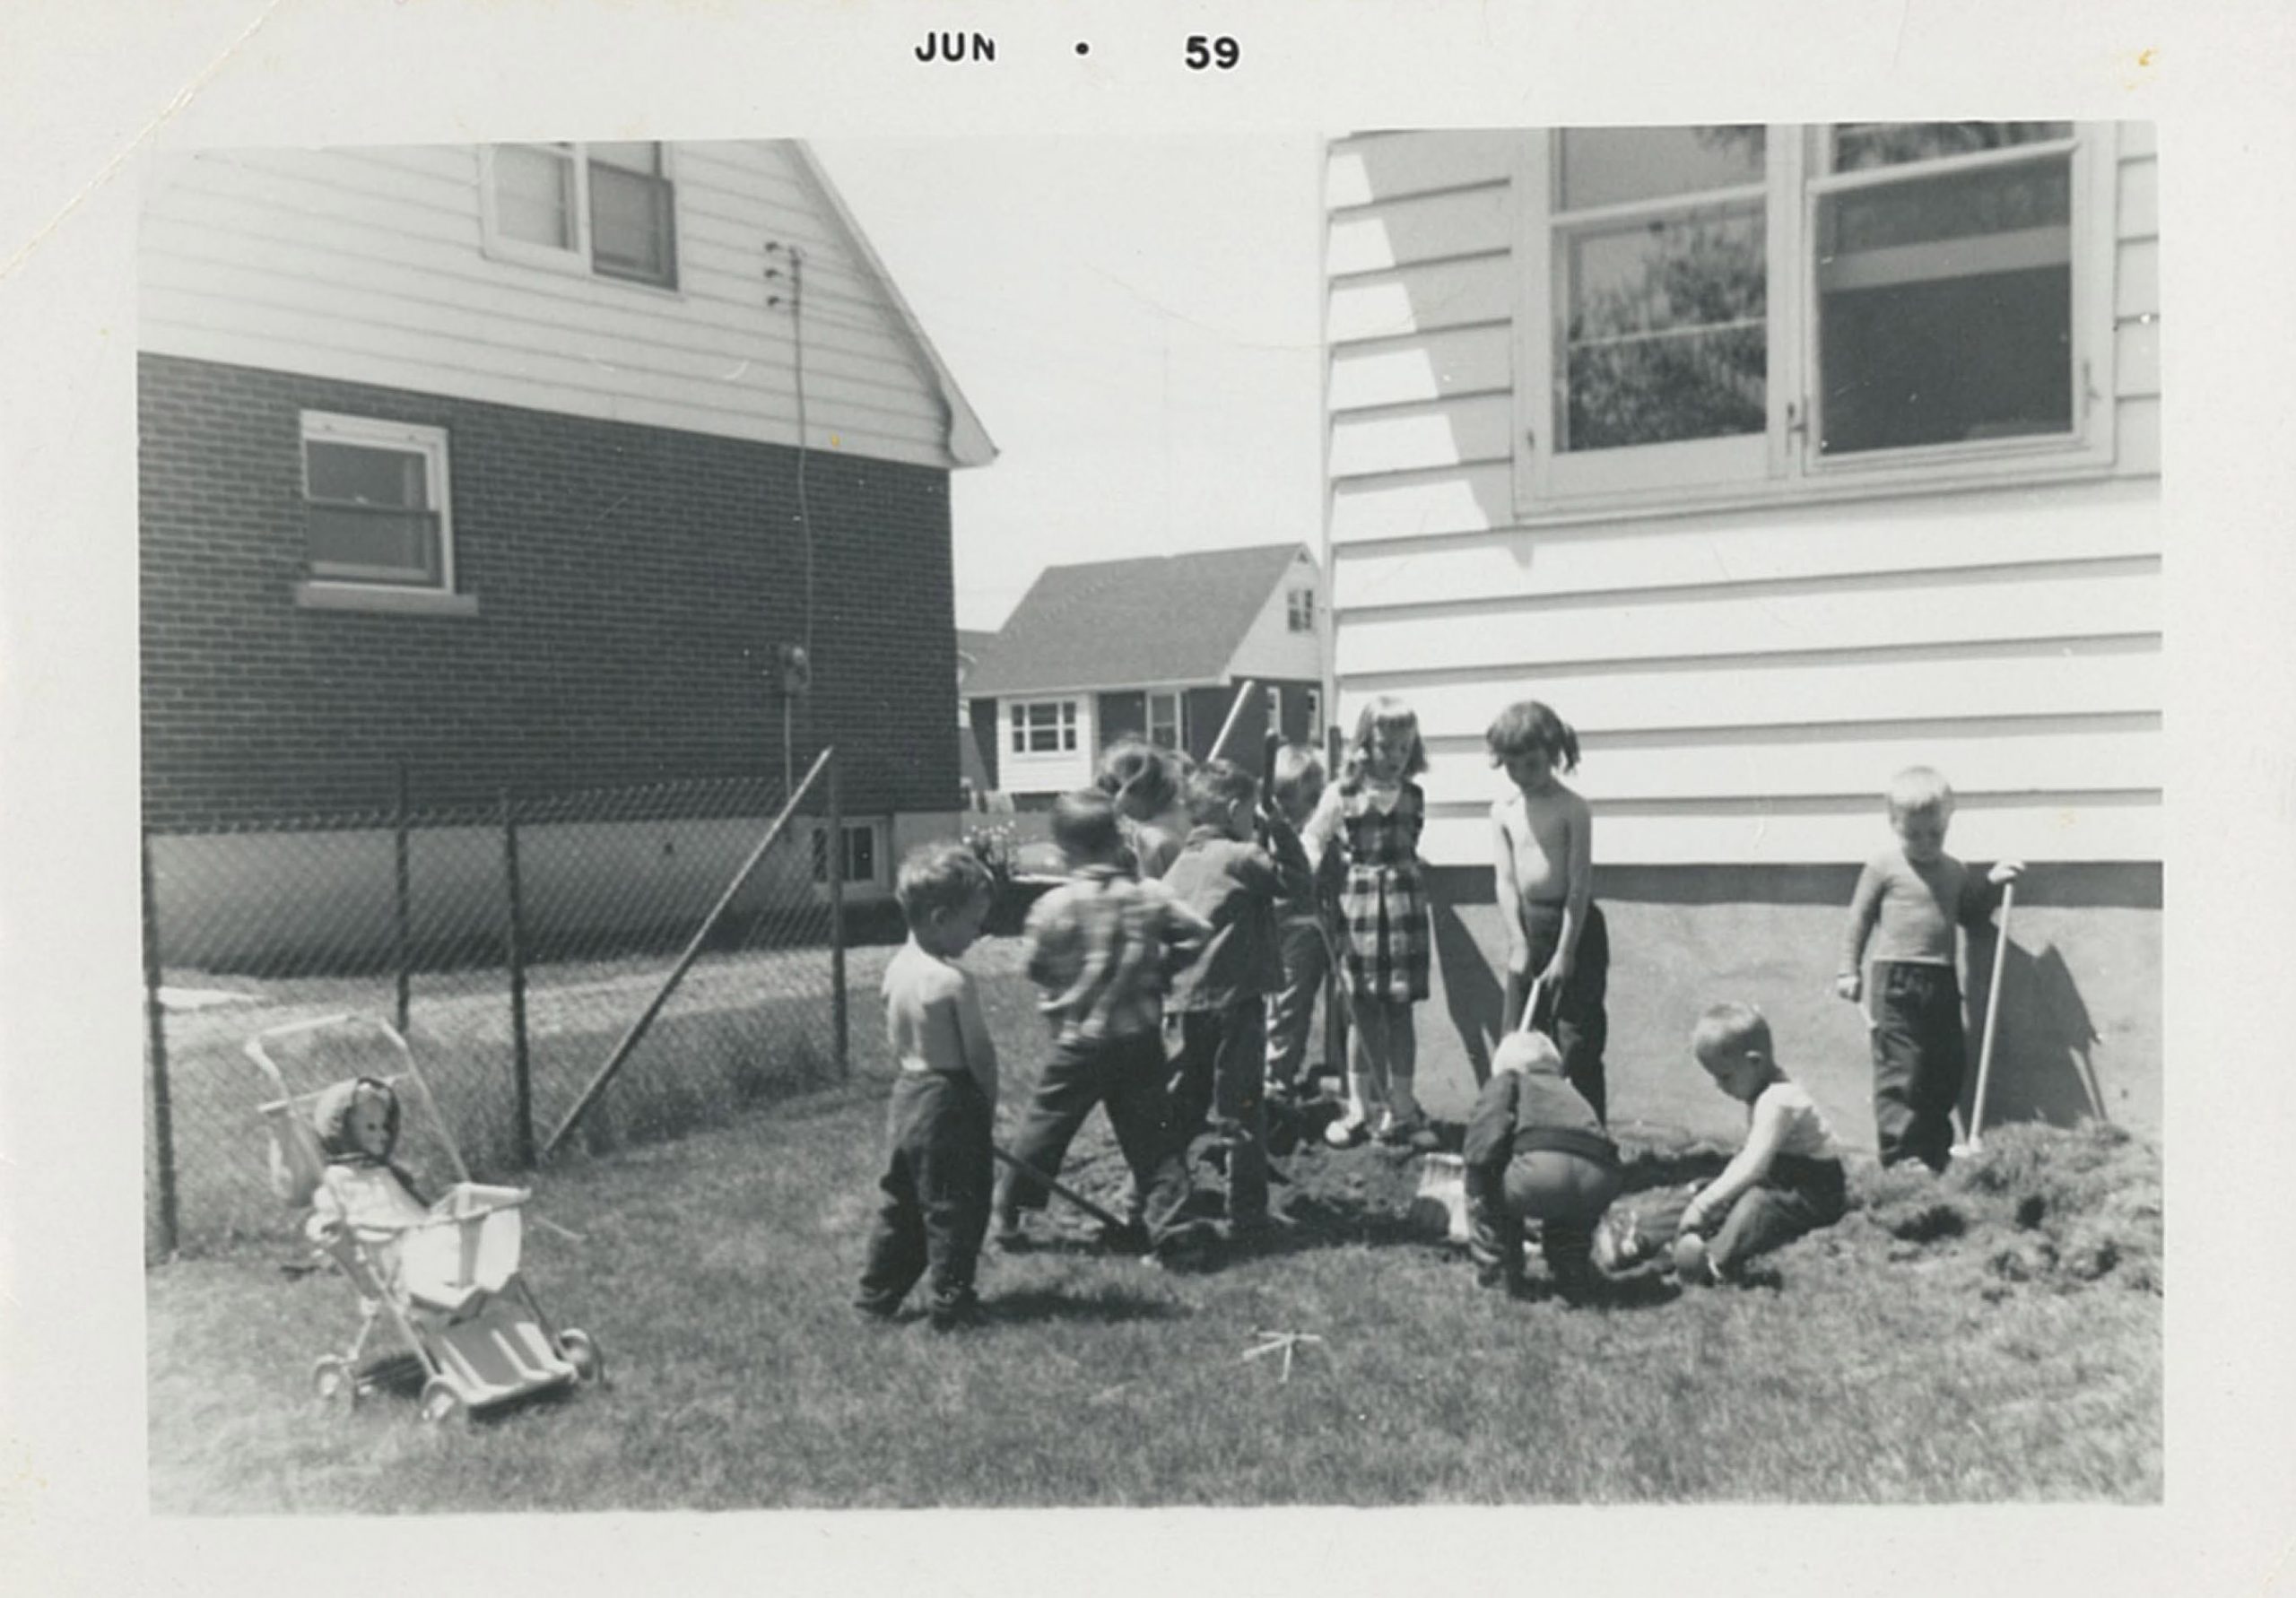 A black and white photograph of a group of children in a backyard. On the top there is typed 